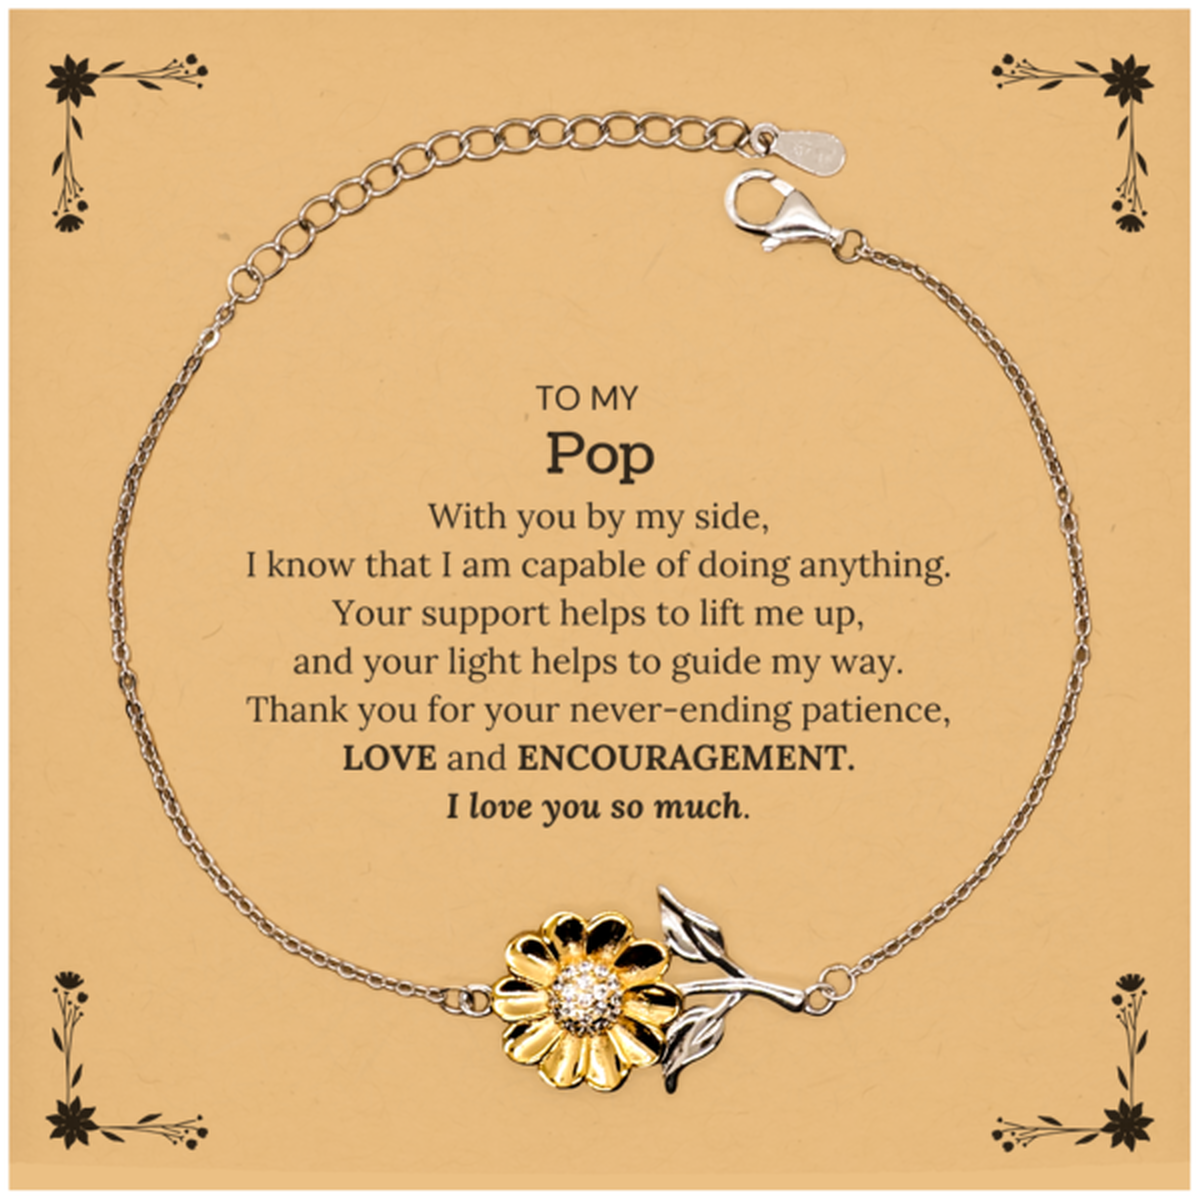 Appreciation Pop Sunflower Bracelet Gifts, To My Pop Birthday Christmas Wedding Keepsake Gifts for Pop With you by my side, I know that I am capable of doing anything. I love you so much